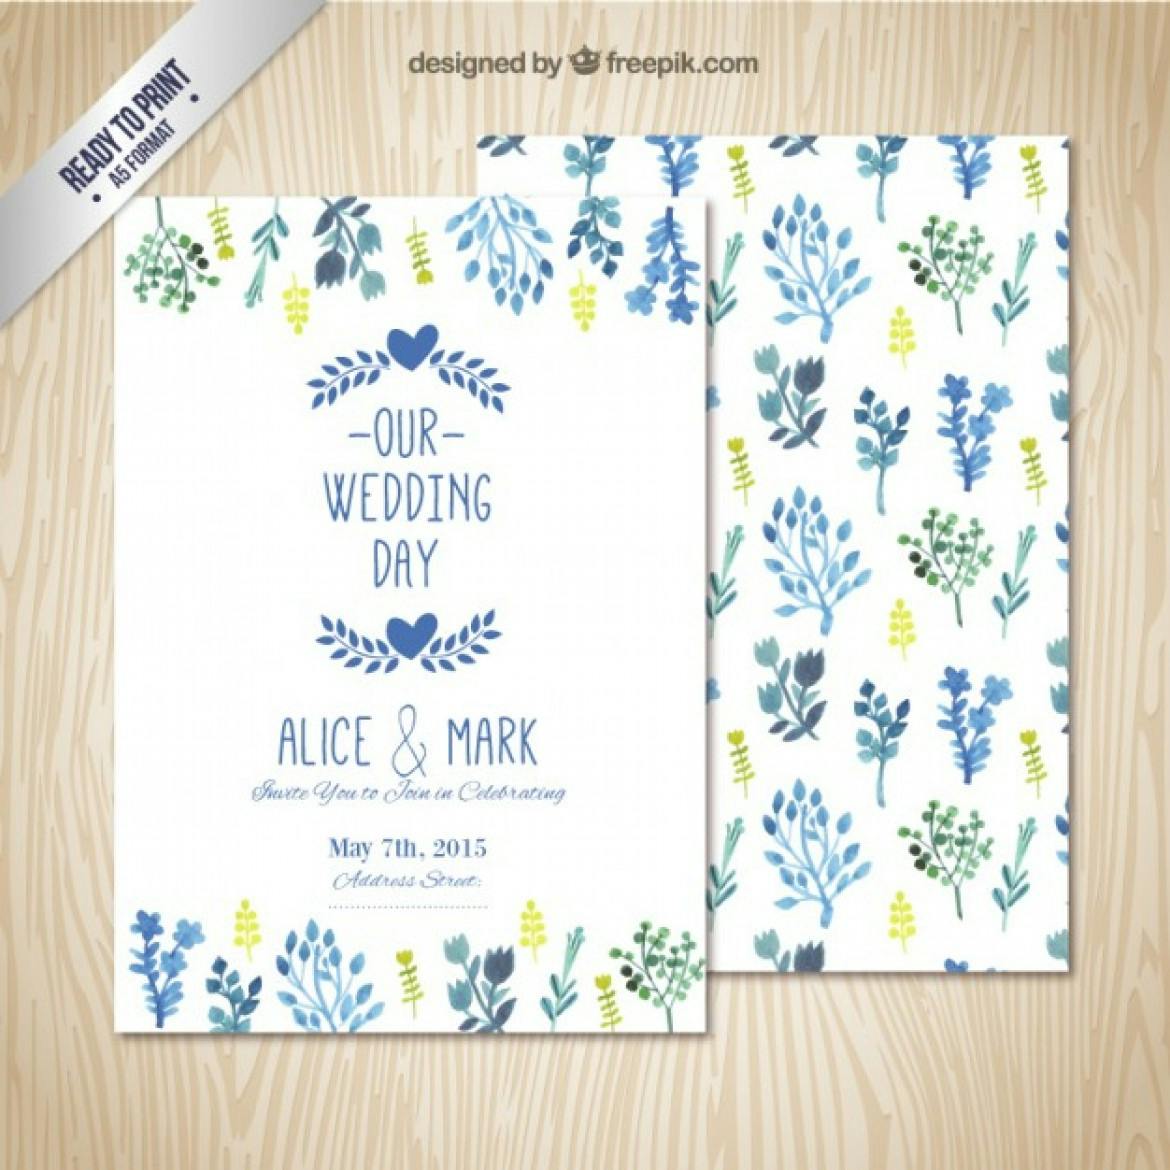 wpid-wedding-invitation-with-watercolor-leaves_23-2147508974-1170x1170